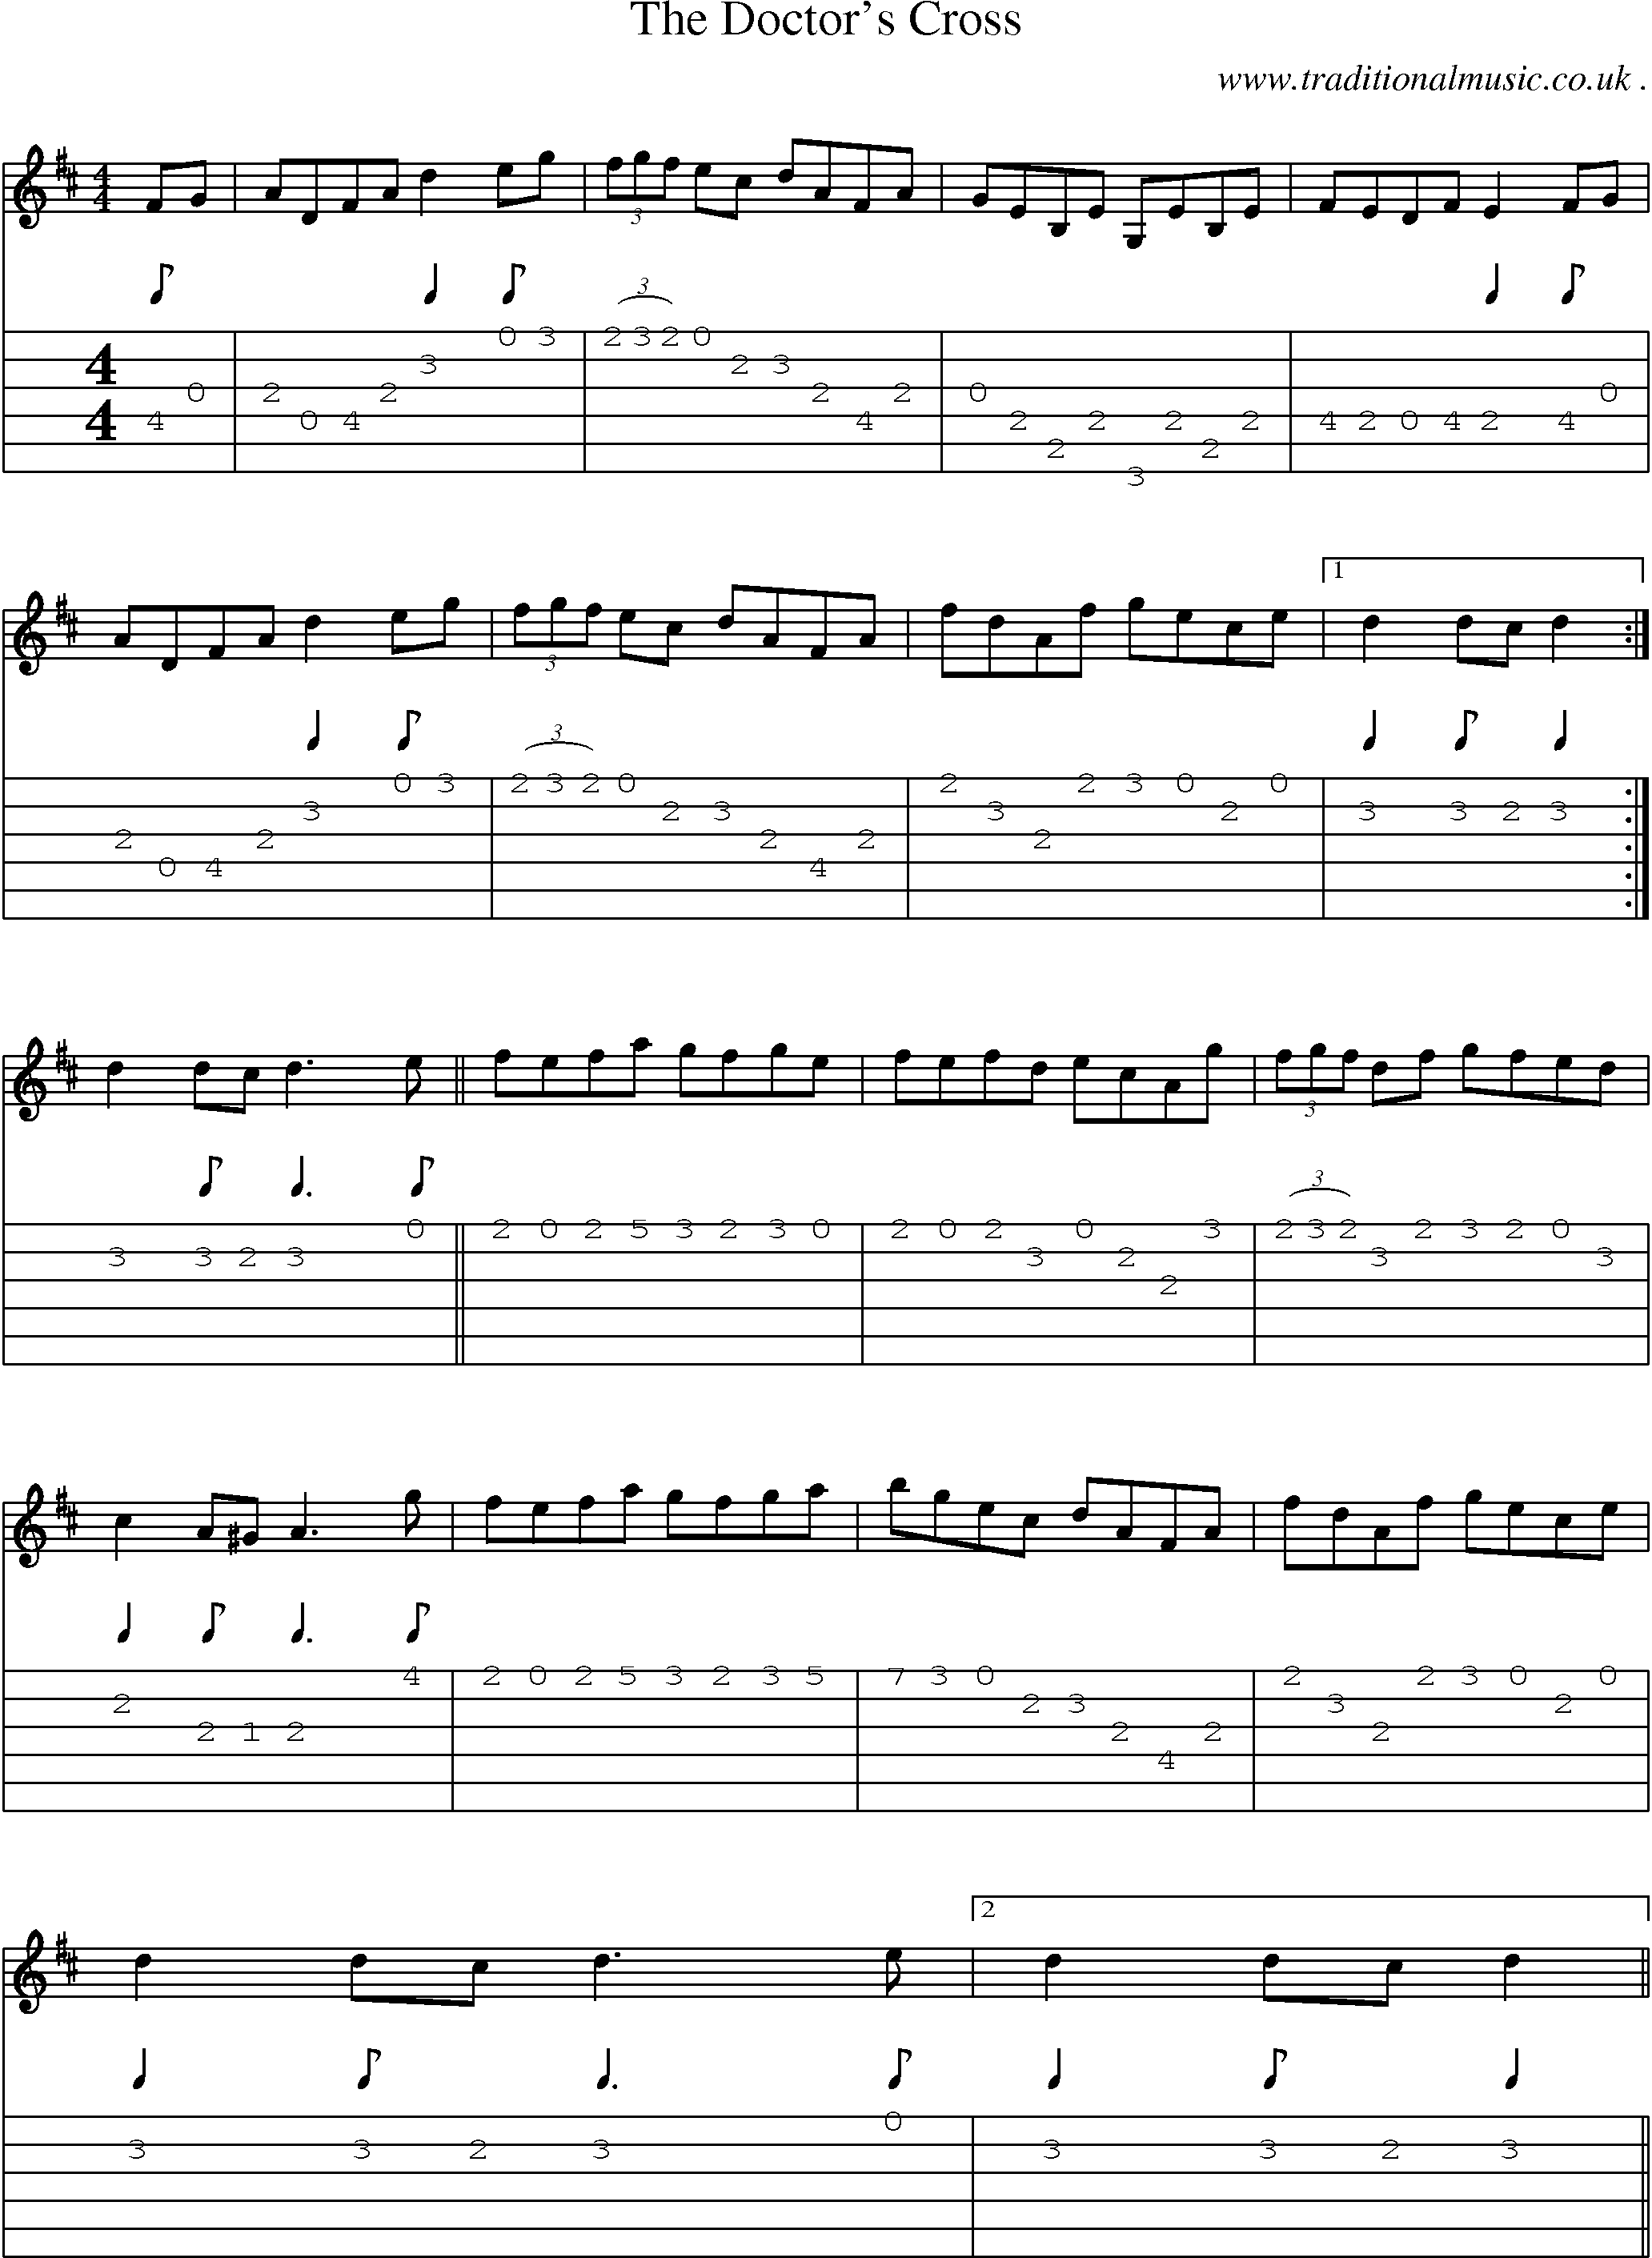 Sheet-Music and Guitar Tabs for The Doctors Cross